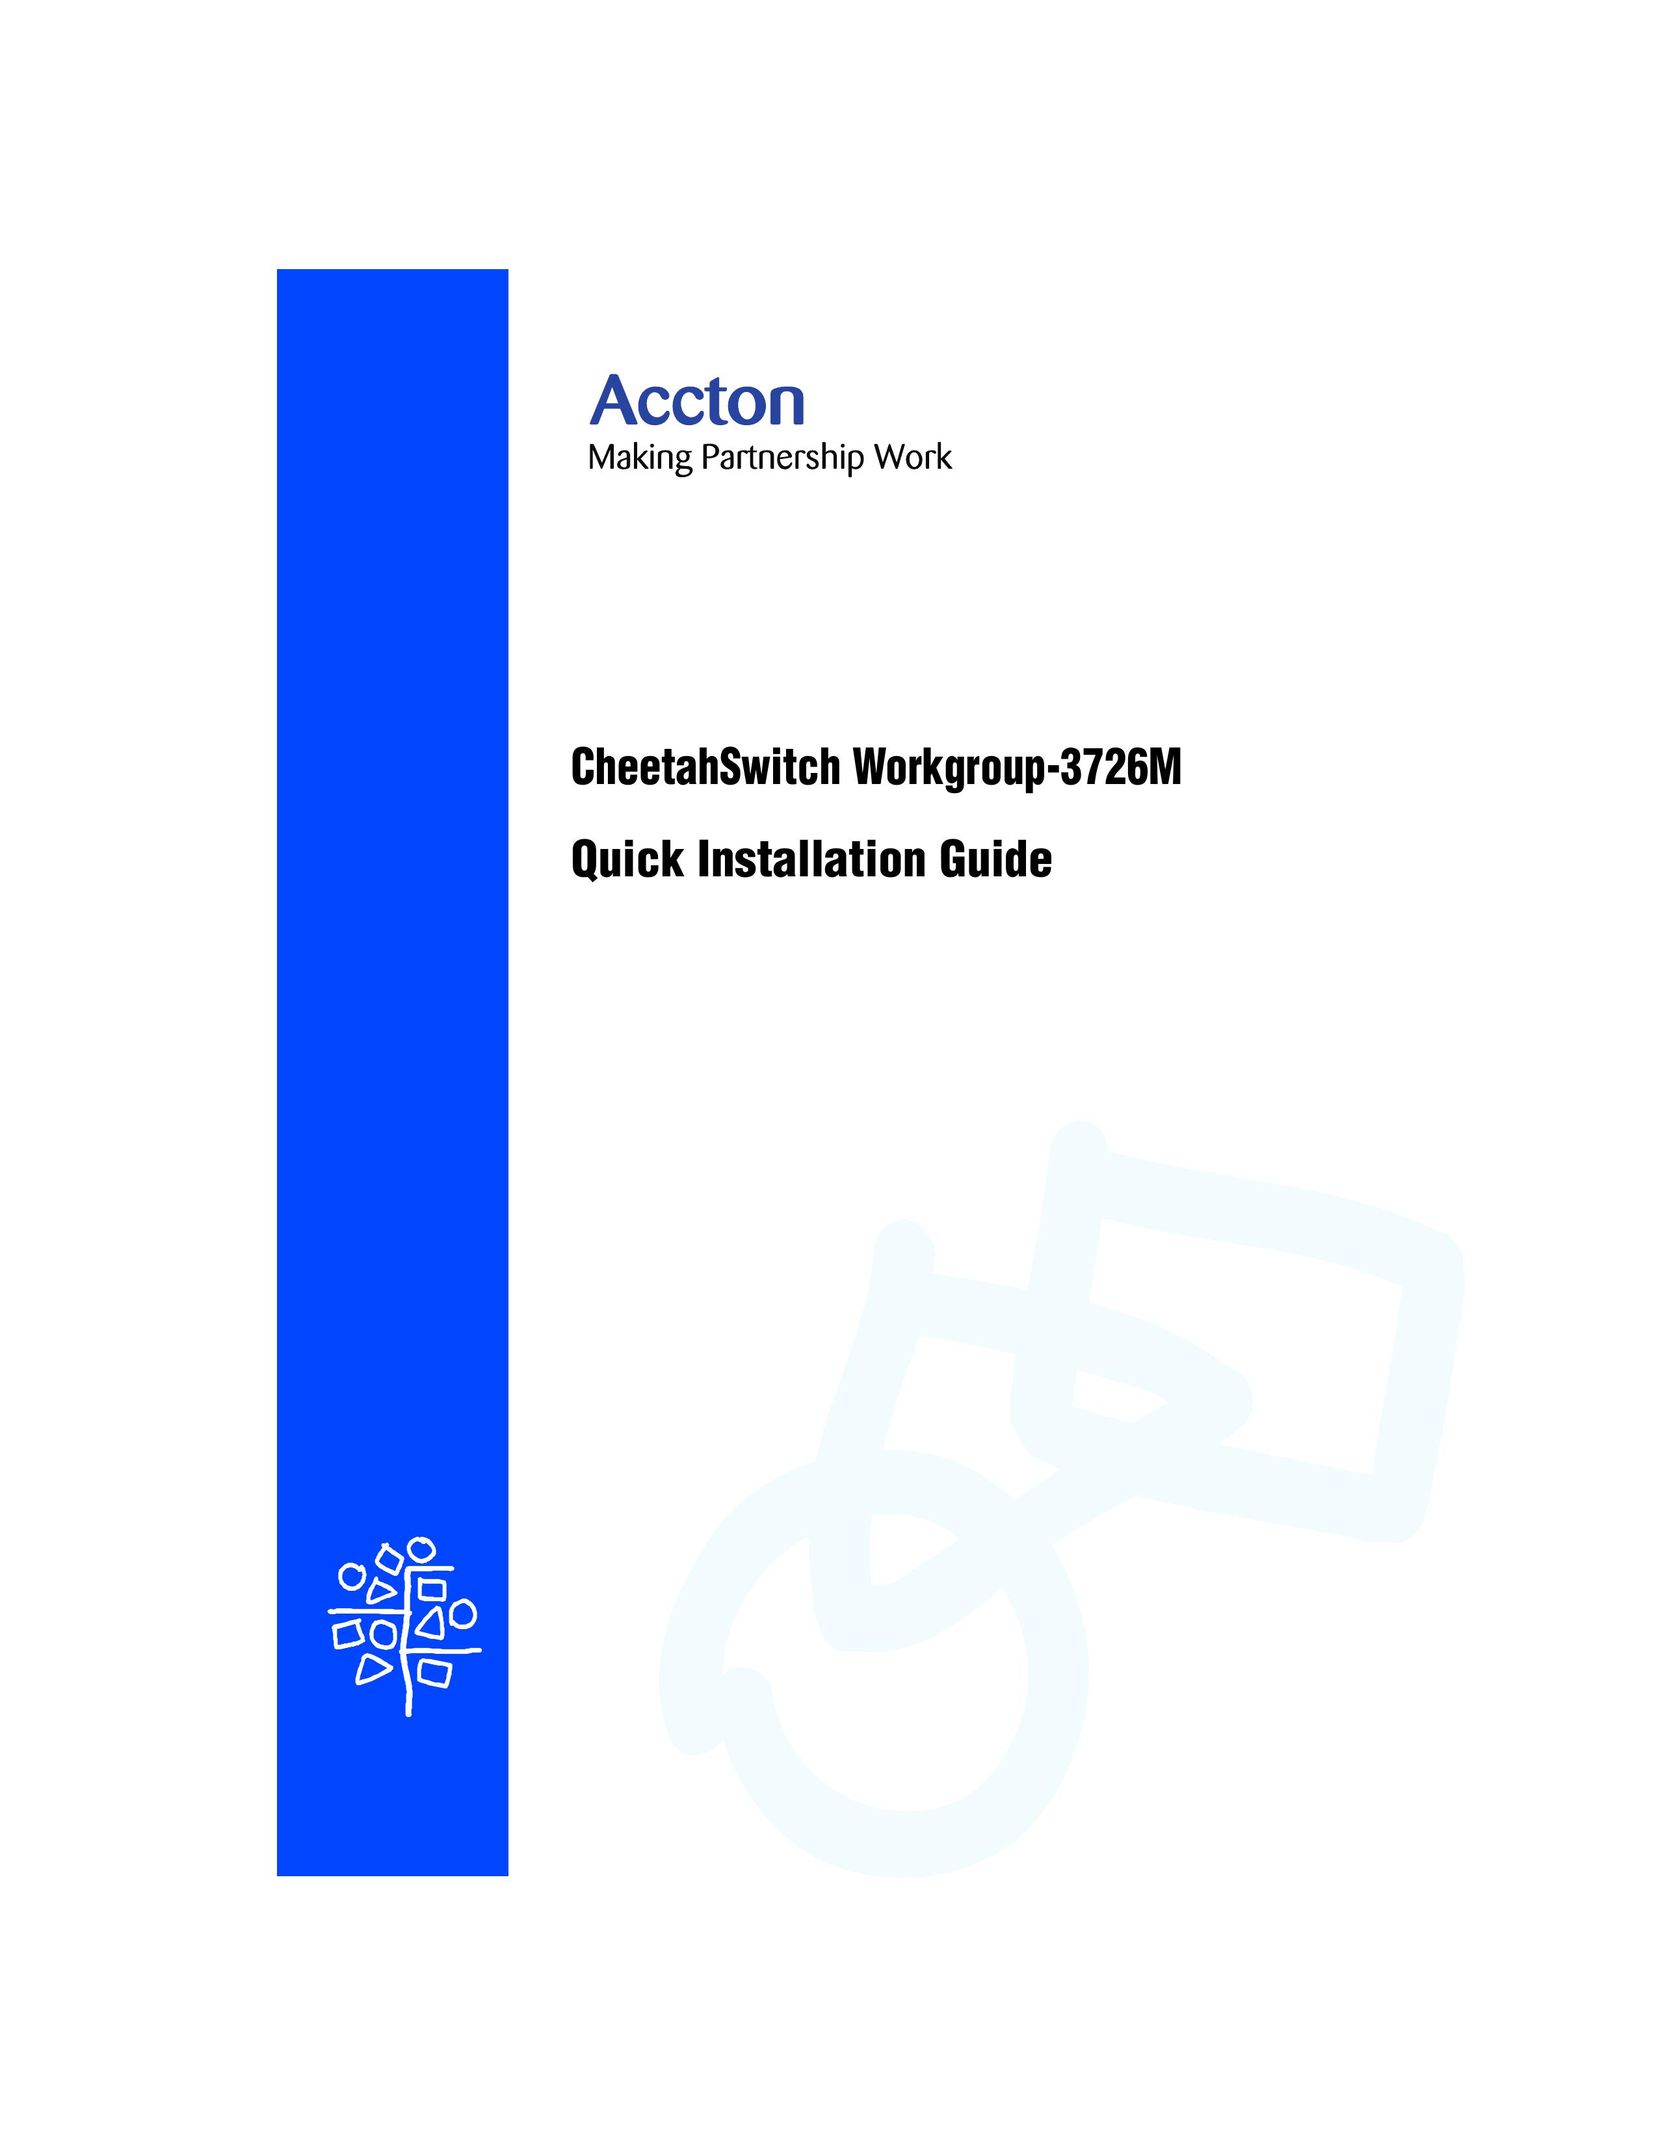 Accton Technology Workgroup-3726M Network Hardware User Manual